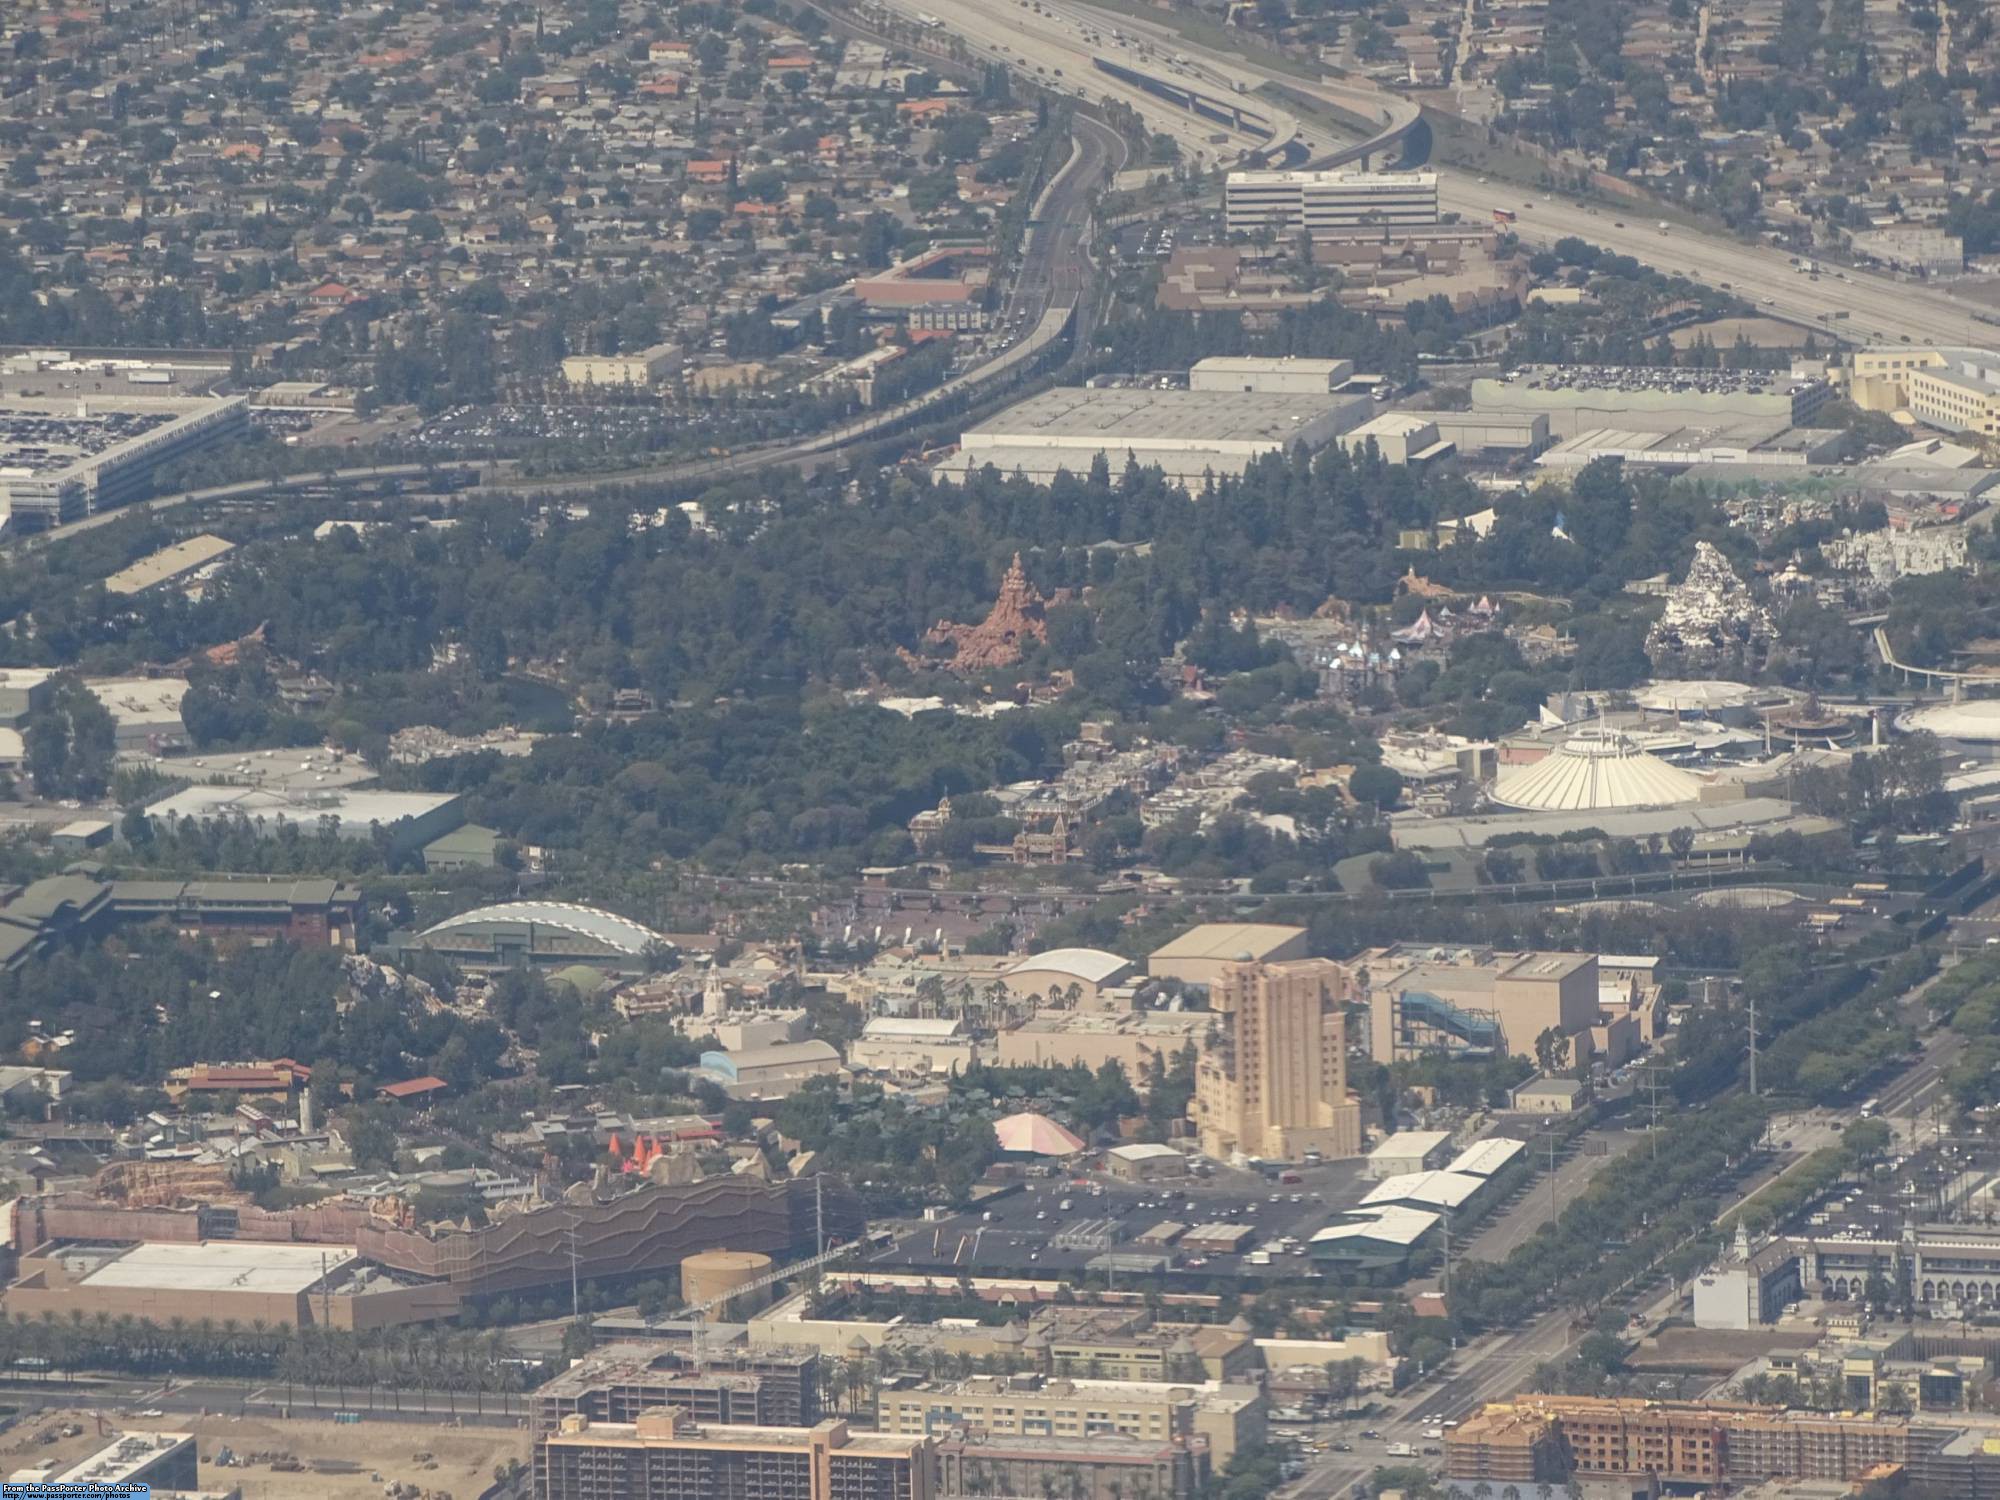 Disneyland - from the air